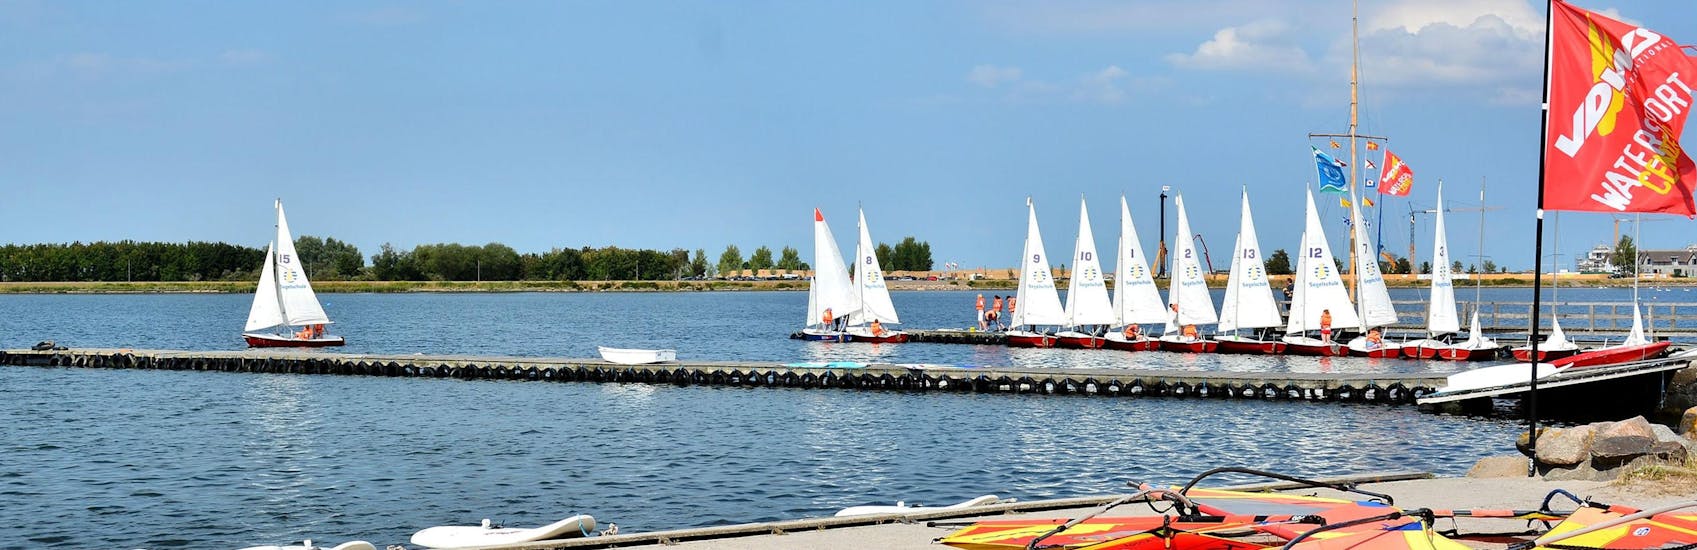 A view of the lake with several boats during Windsurfing Lessons for Advanced - Heiligenhafen with Wassersportcenter Heiligenhafen.